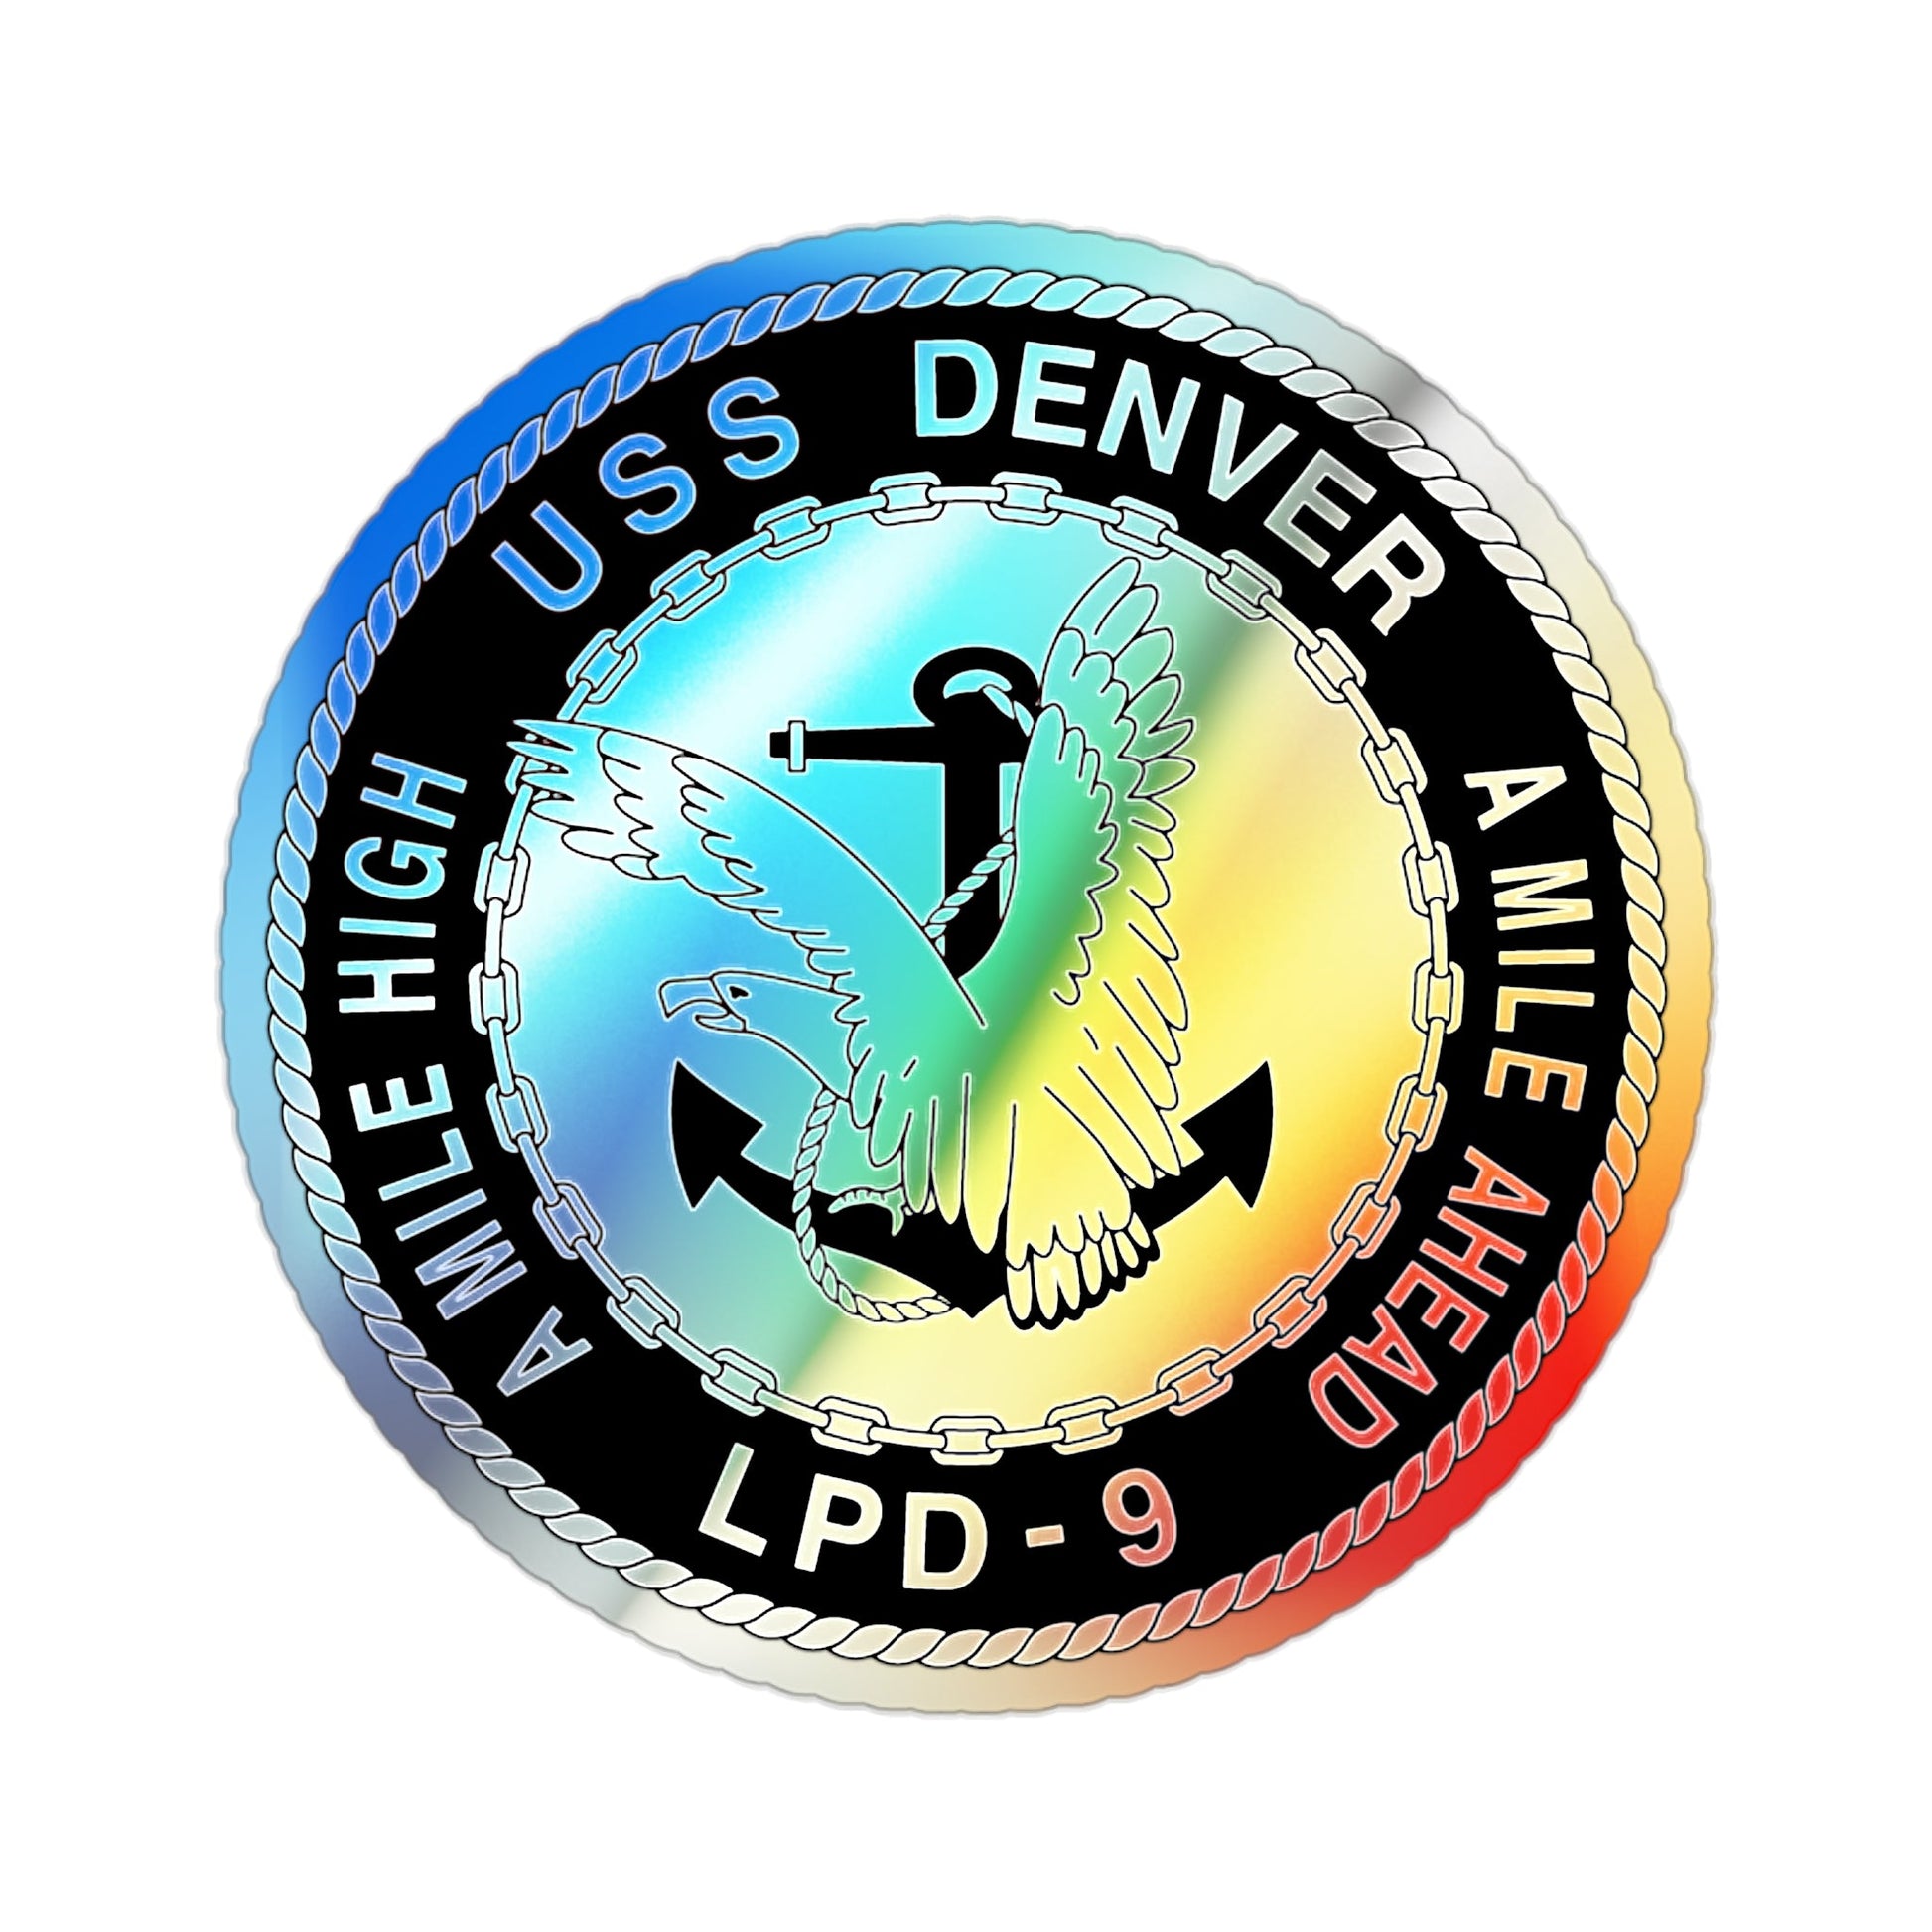 A Mile High USS Denver A Mile Ahead LPD 9 BW (U.S. Navy) Holographic STICKER Die-Cut Vinyl Decal-2 Inch-The Sticker Space